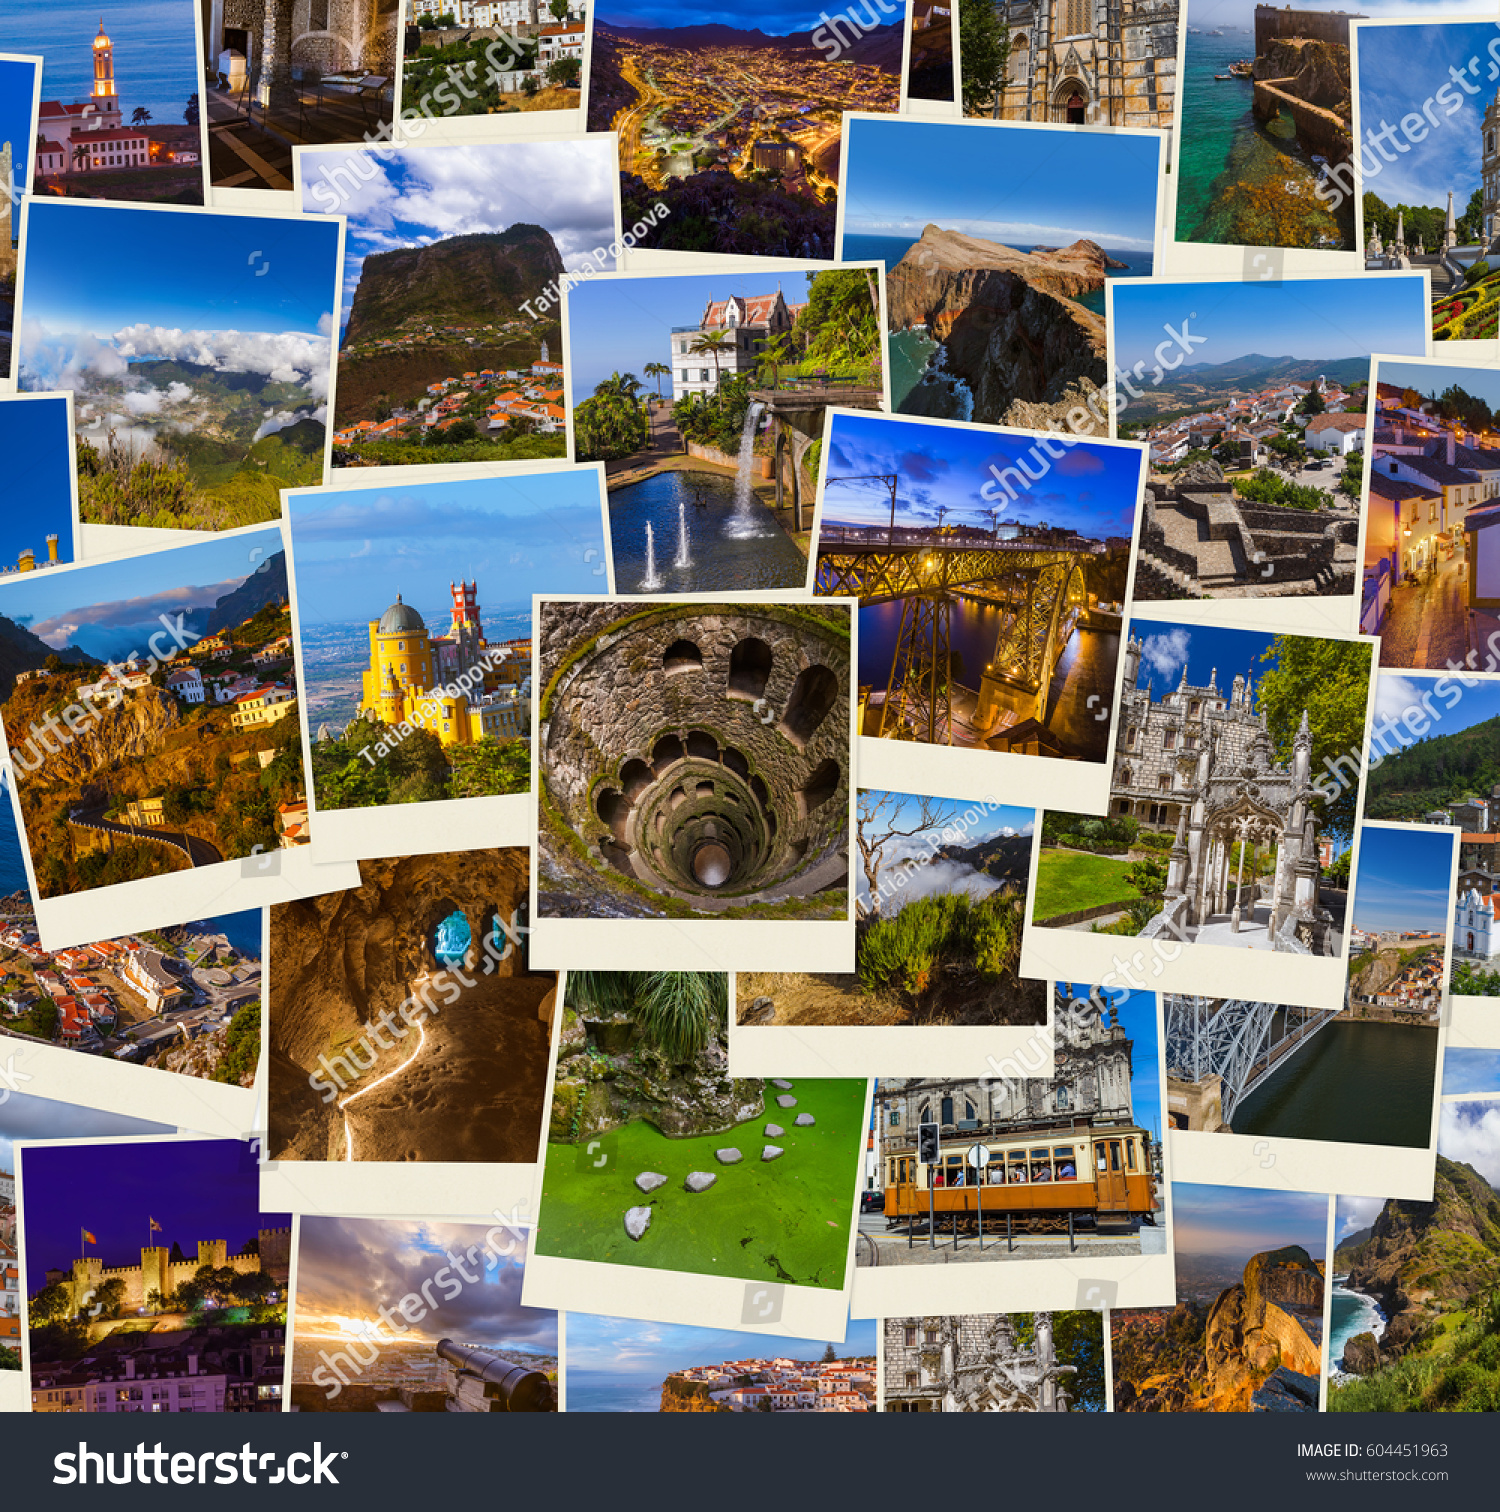 Portugal Travel Images Nature Travel Background Stock Photo